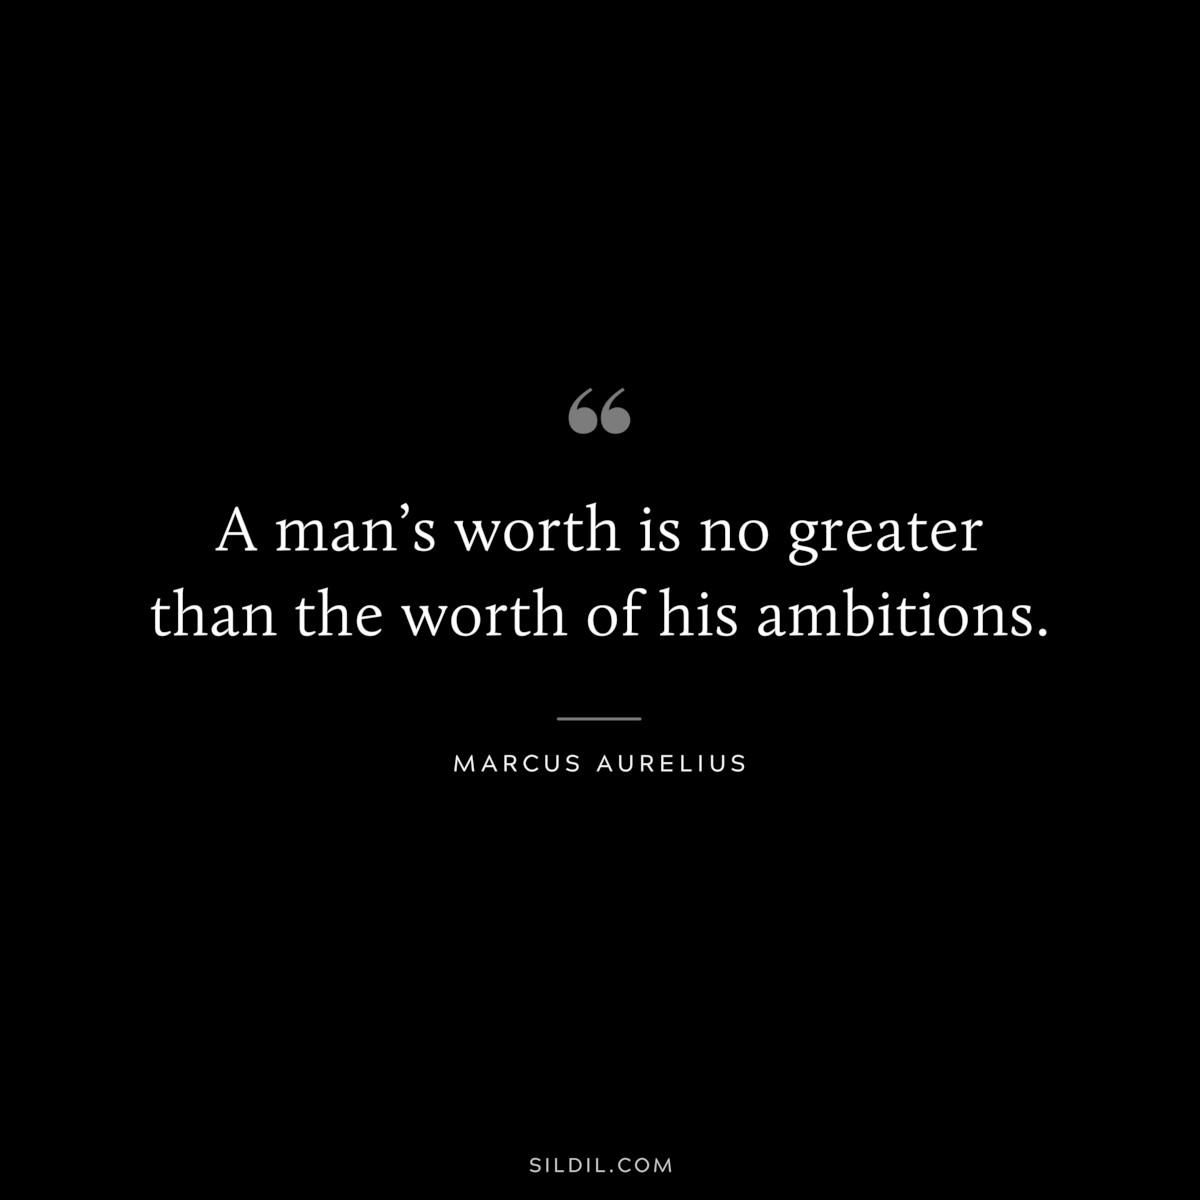 A man’s worth is no greater than the worth of his ambitions. ― Marcus Aurelius